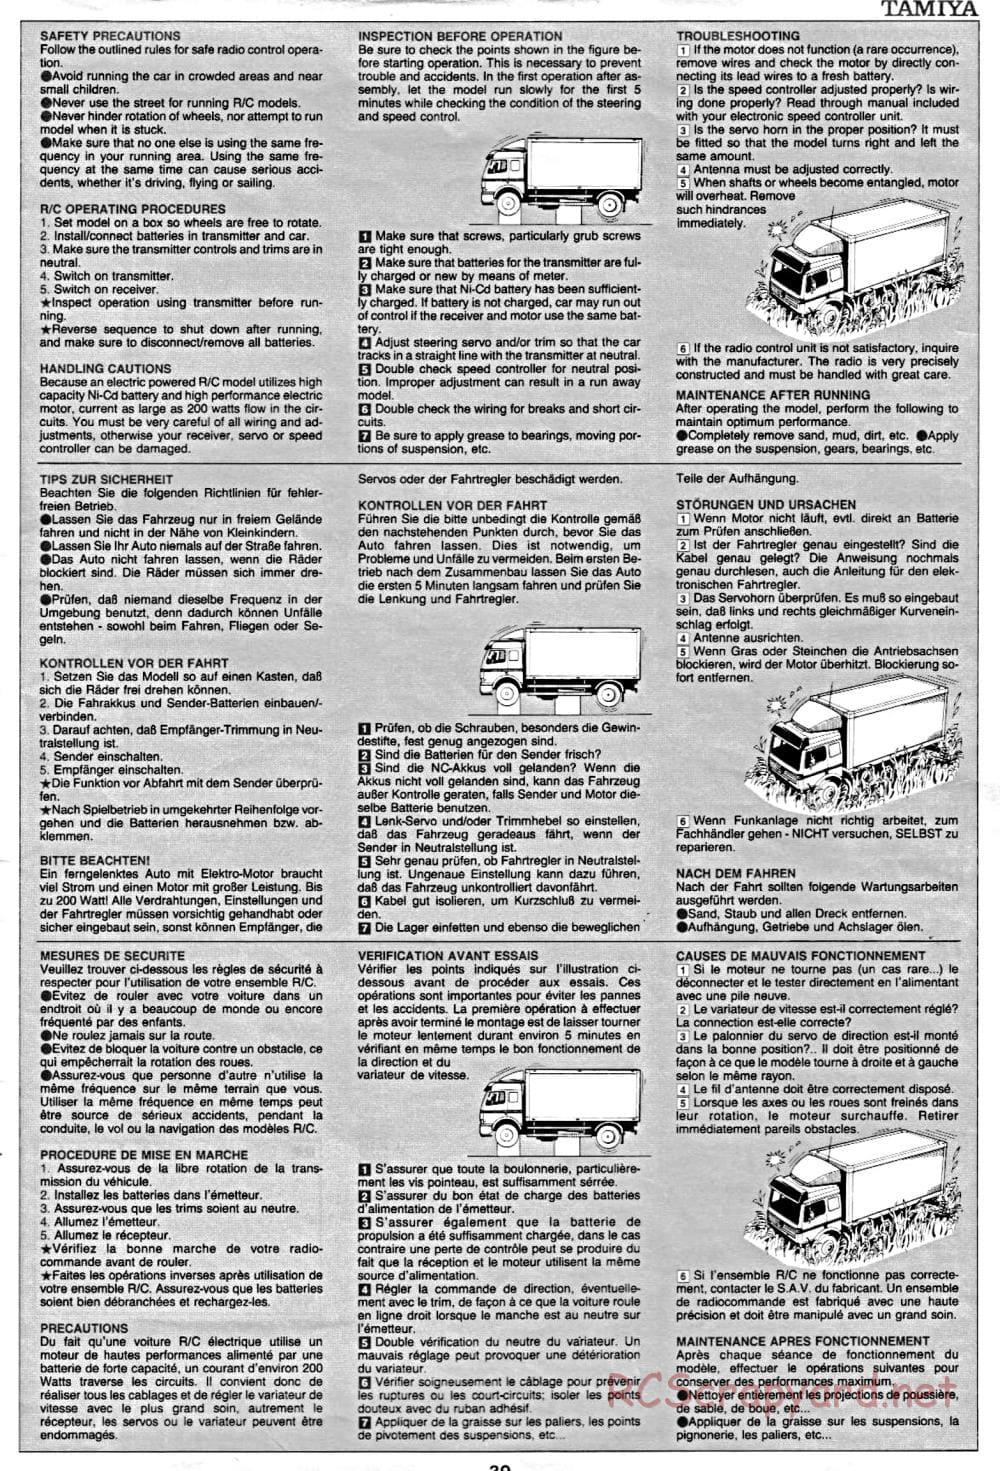 Tamiya - Mercedes-Benz 1850L Delivery Truck - Manual - Page 39